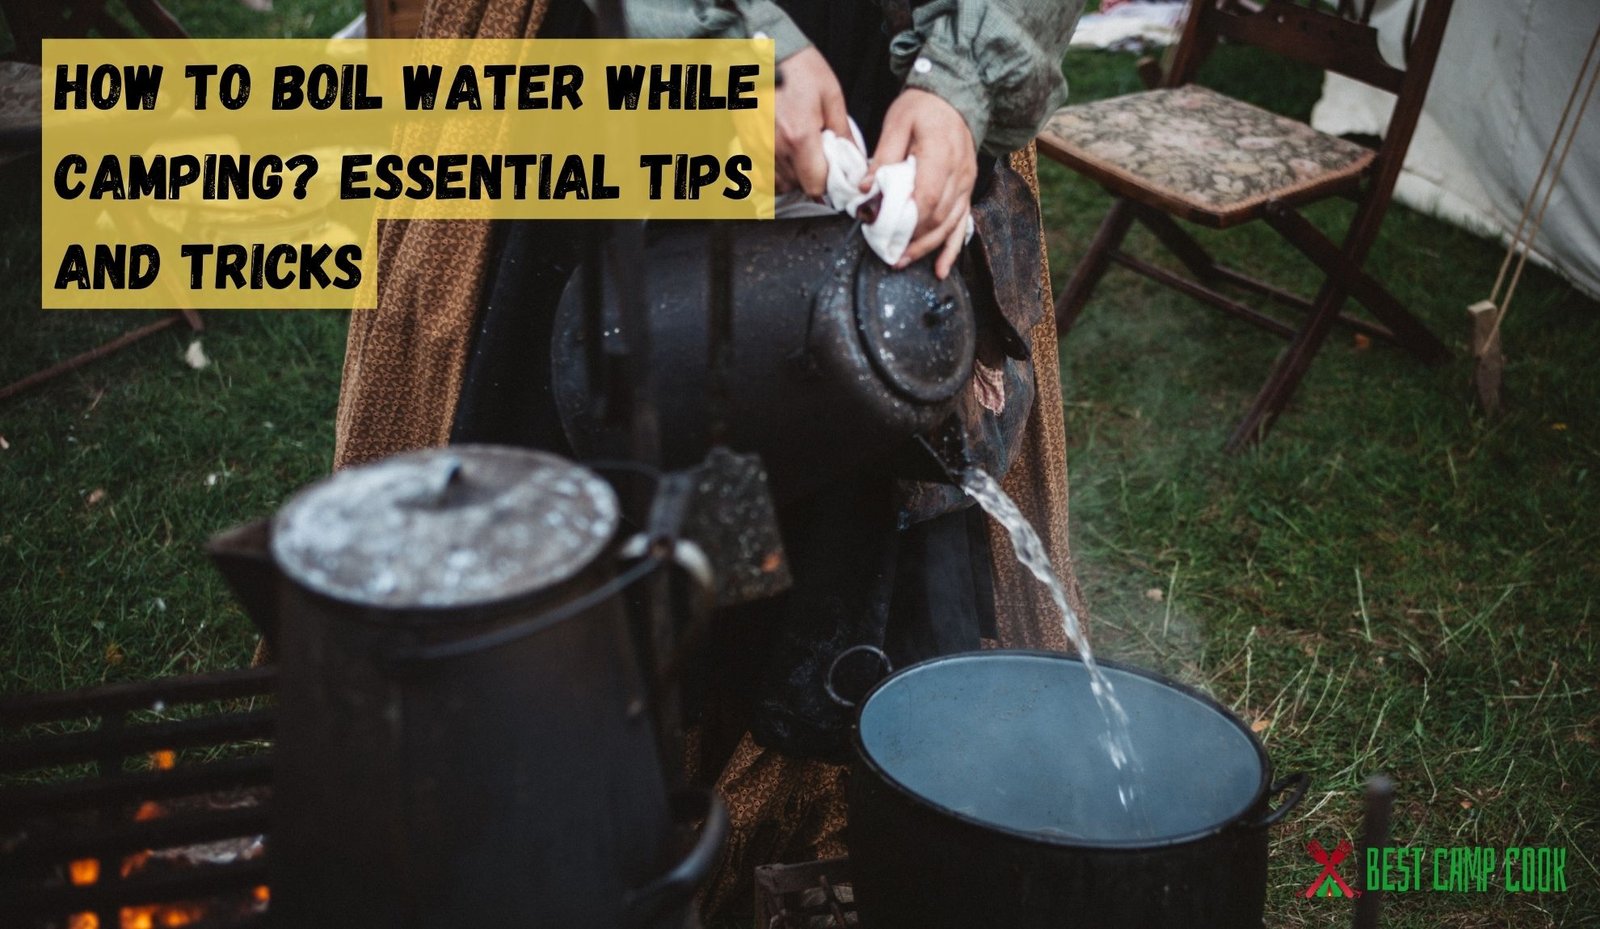 How to Boil Water While Camping